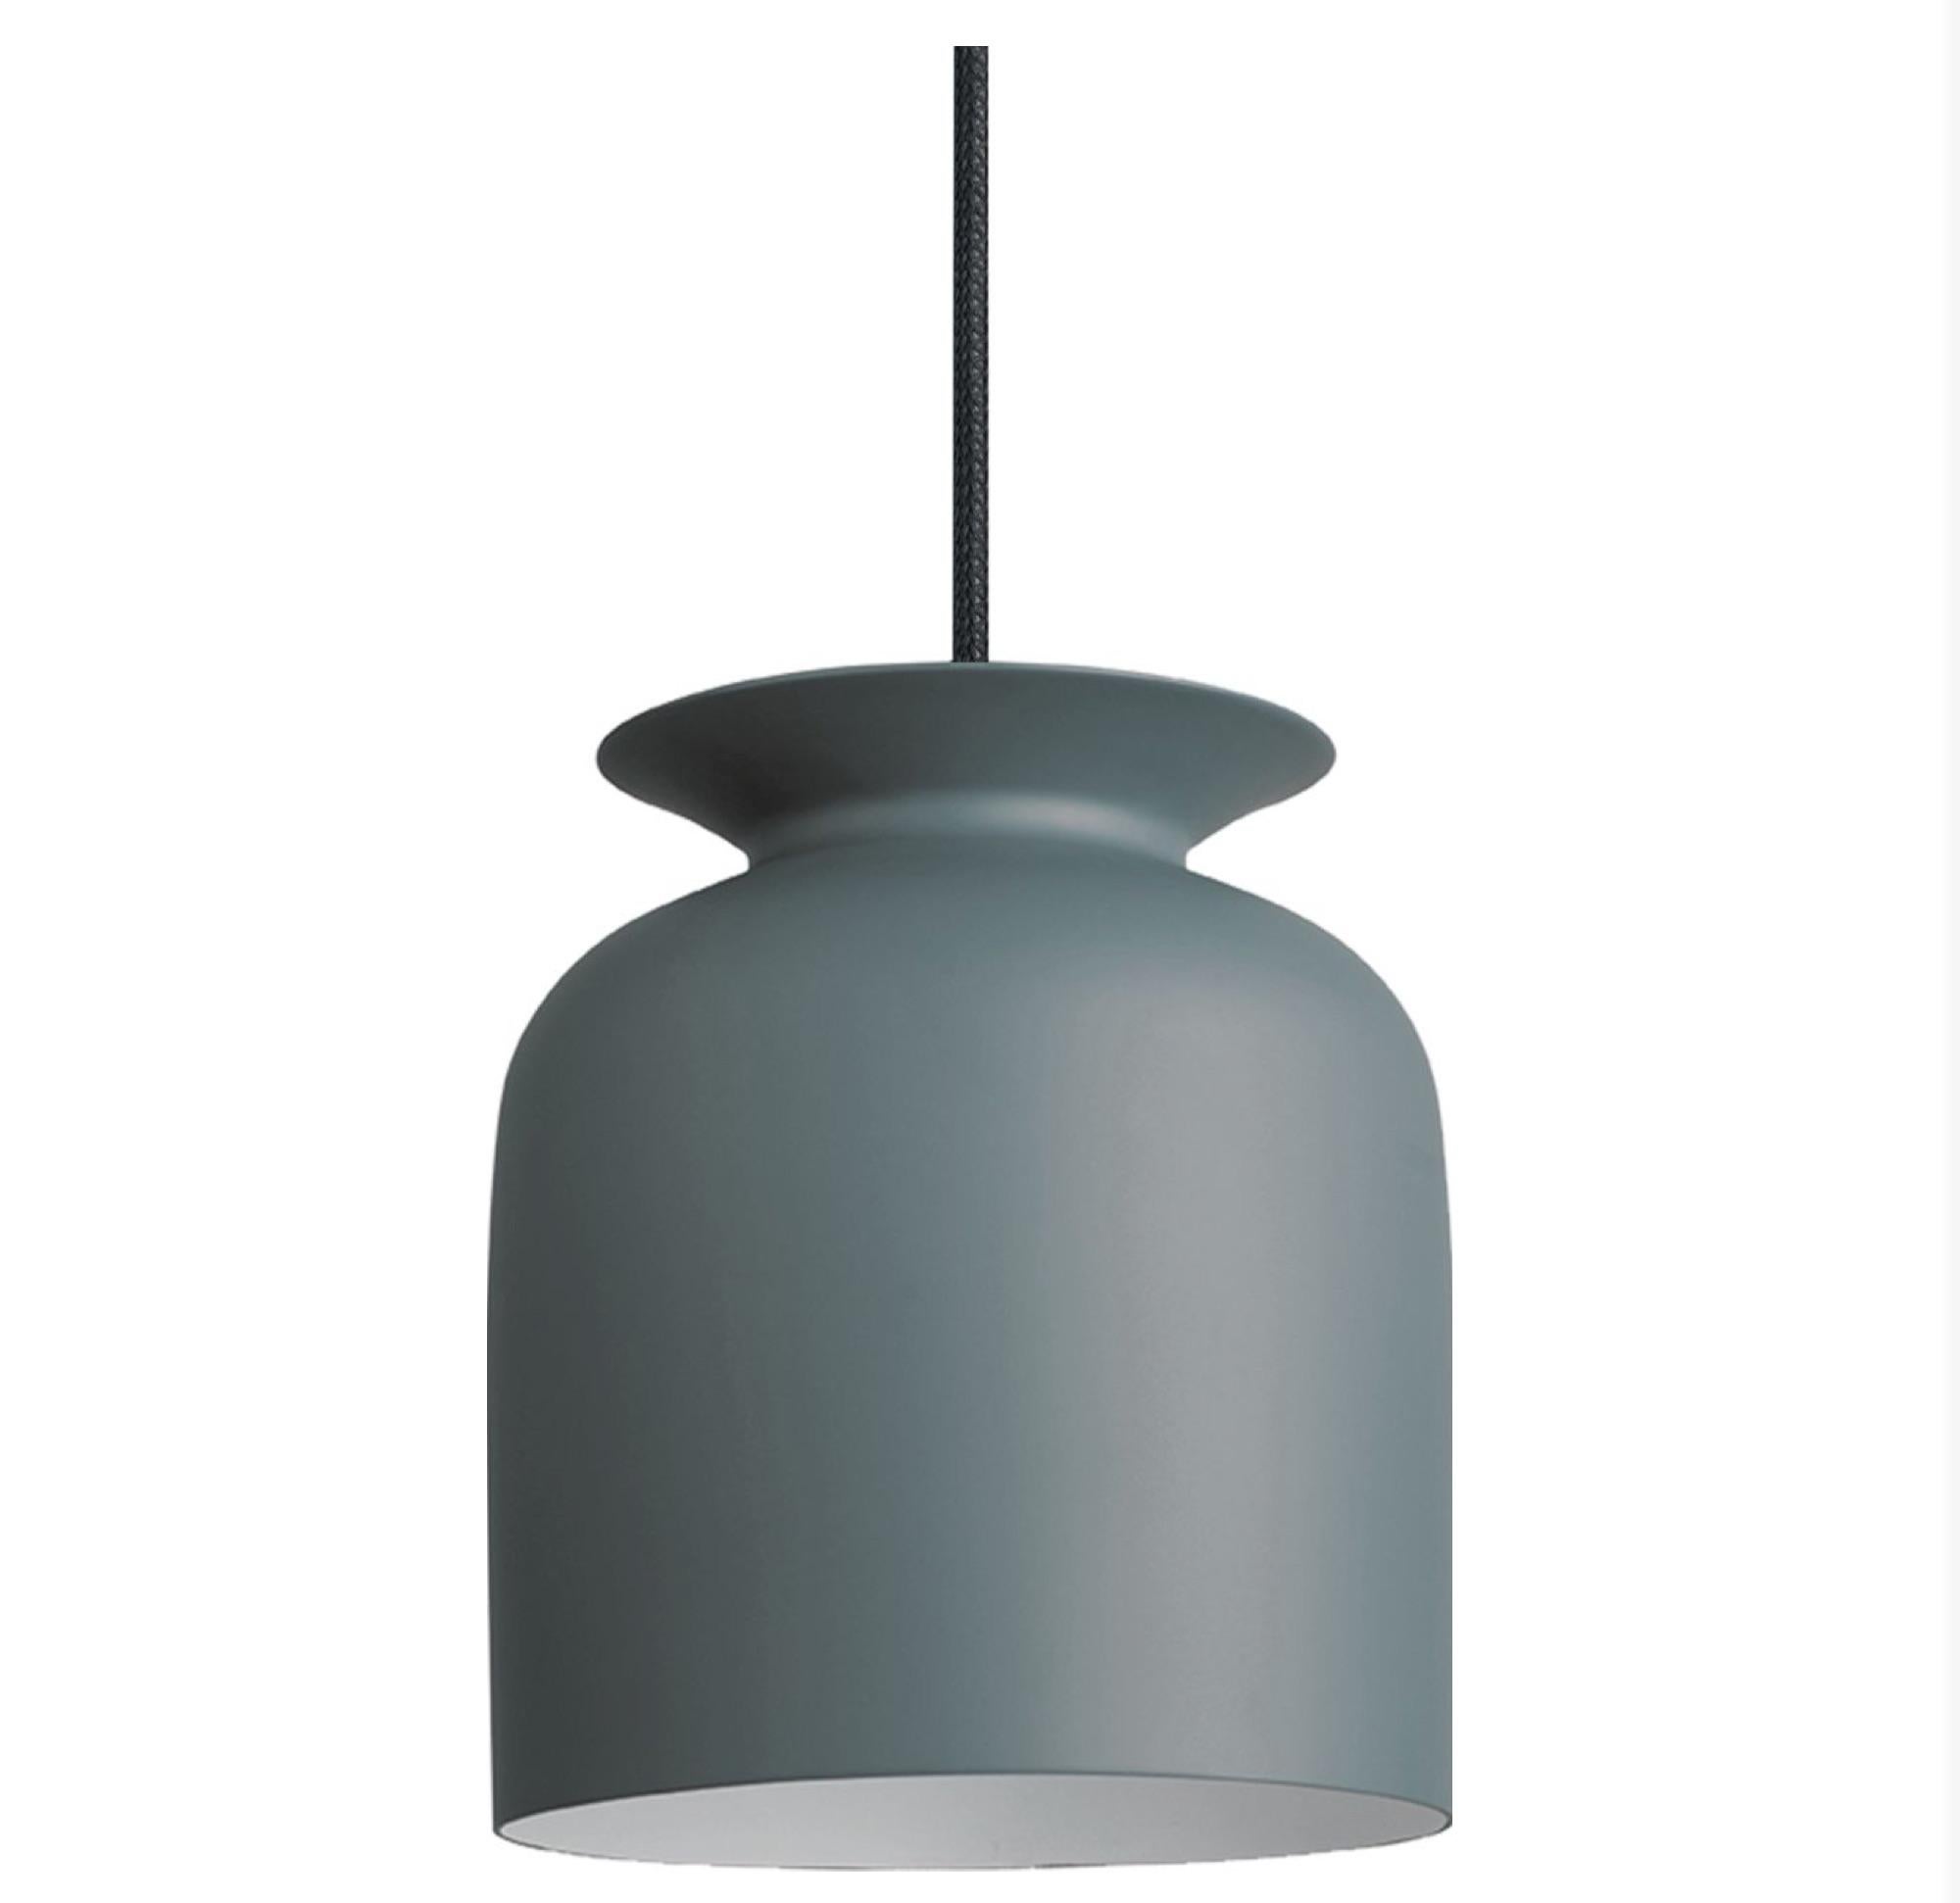 Small Oliver Schick Ronde pendant in pigeon grey for Gubi. Designed by Oliver Schick, the Ronde Pendant has an industrial, yet friendly look that is well-suited for both home decor and professional environments. Executed in spun aluminum with